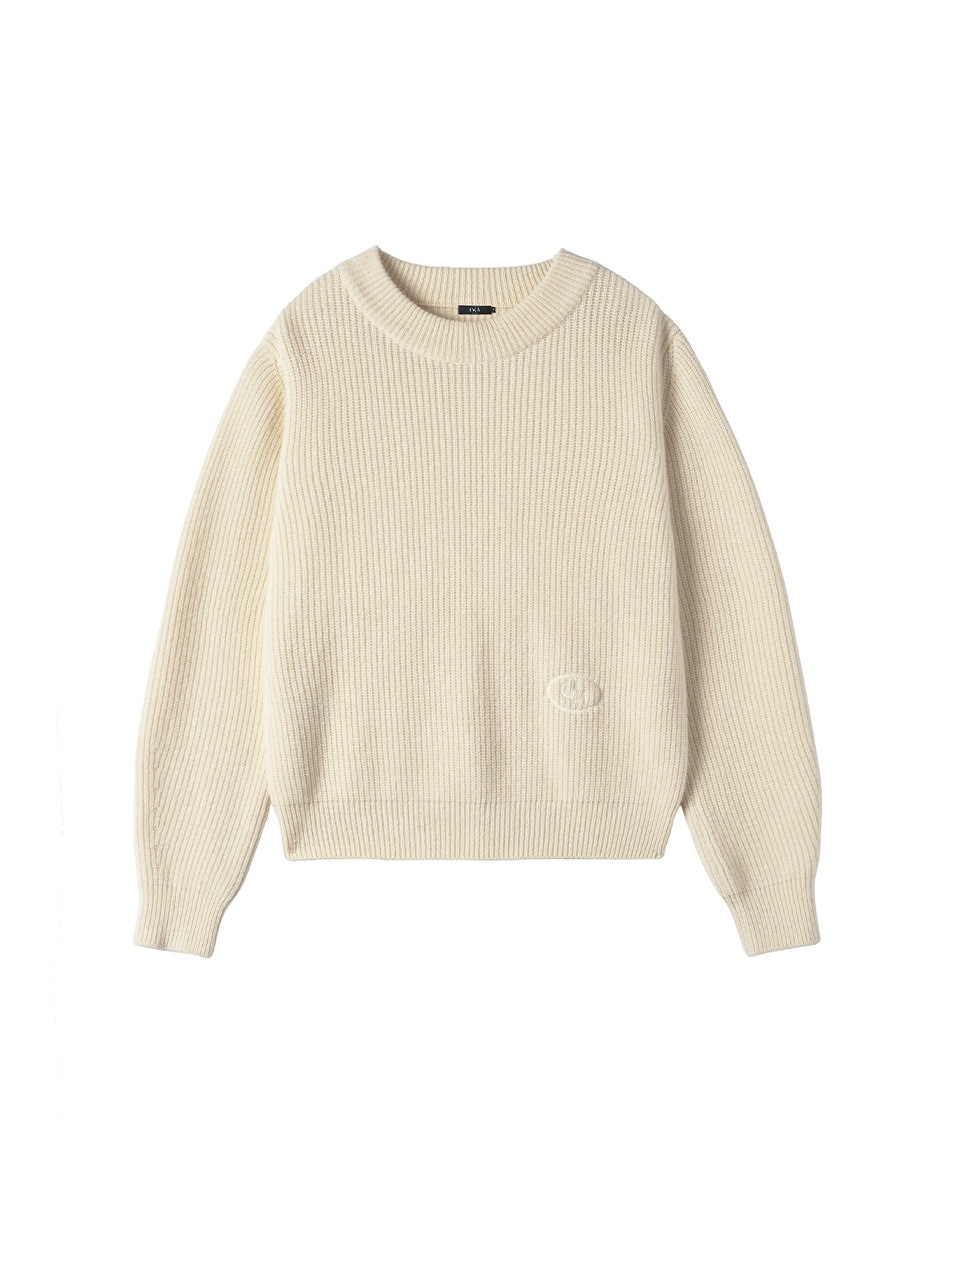 Flos Embroidery Wool Knit White Dove